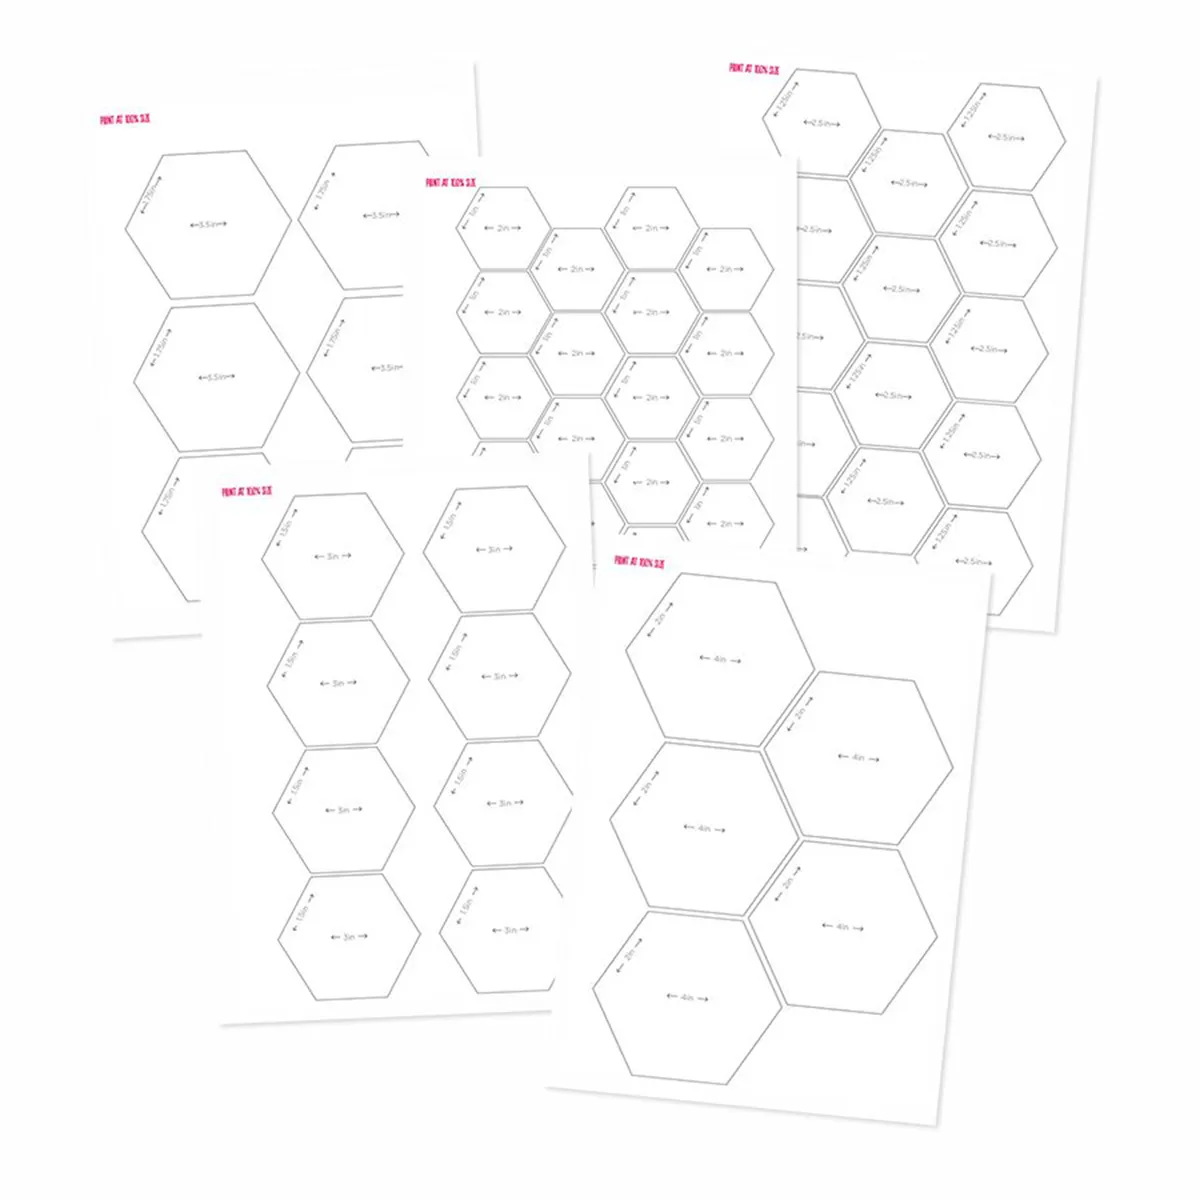 Hexagon Quilting Template - Free Printable